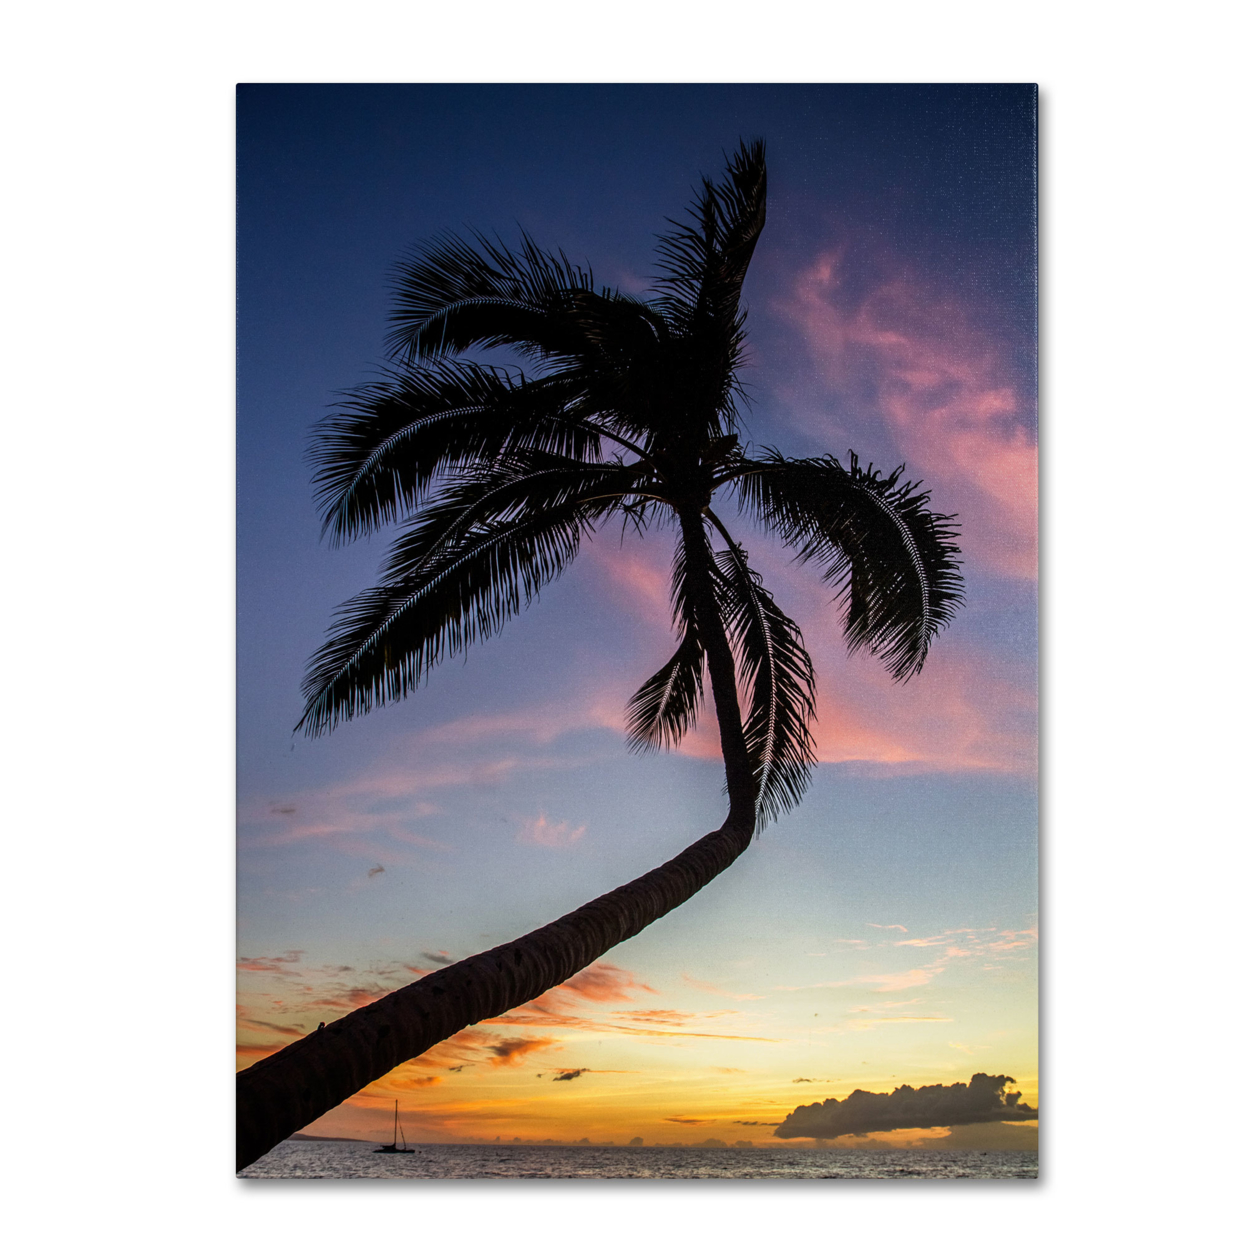 Pierre Leclerc 'Sunset Palm' Canvas Wall Art 35 X 47 Inches